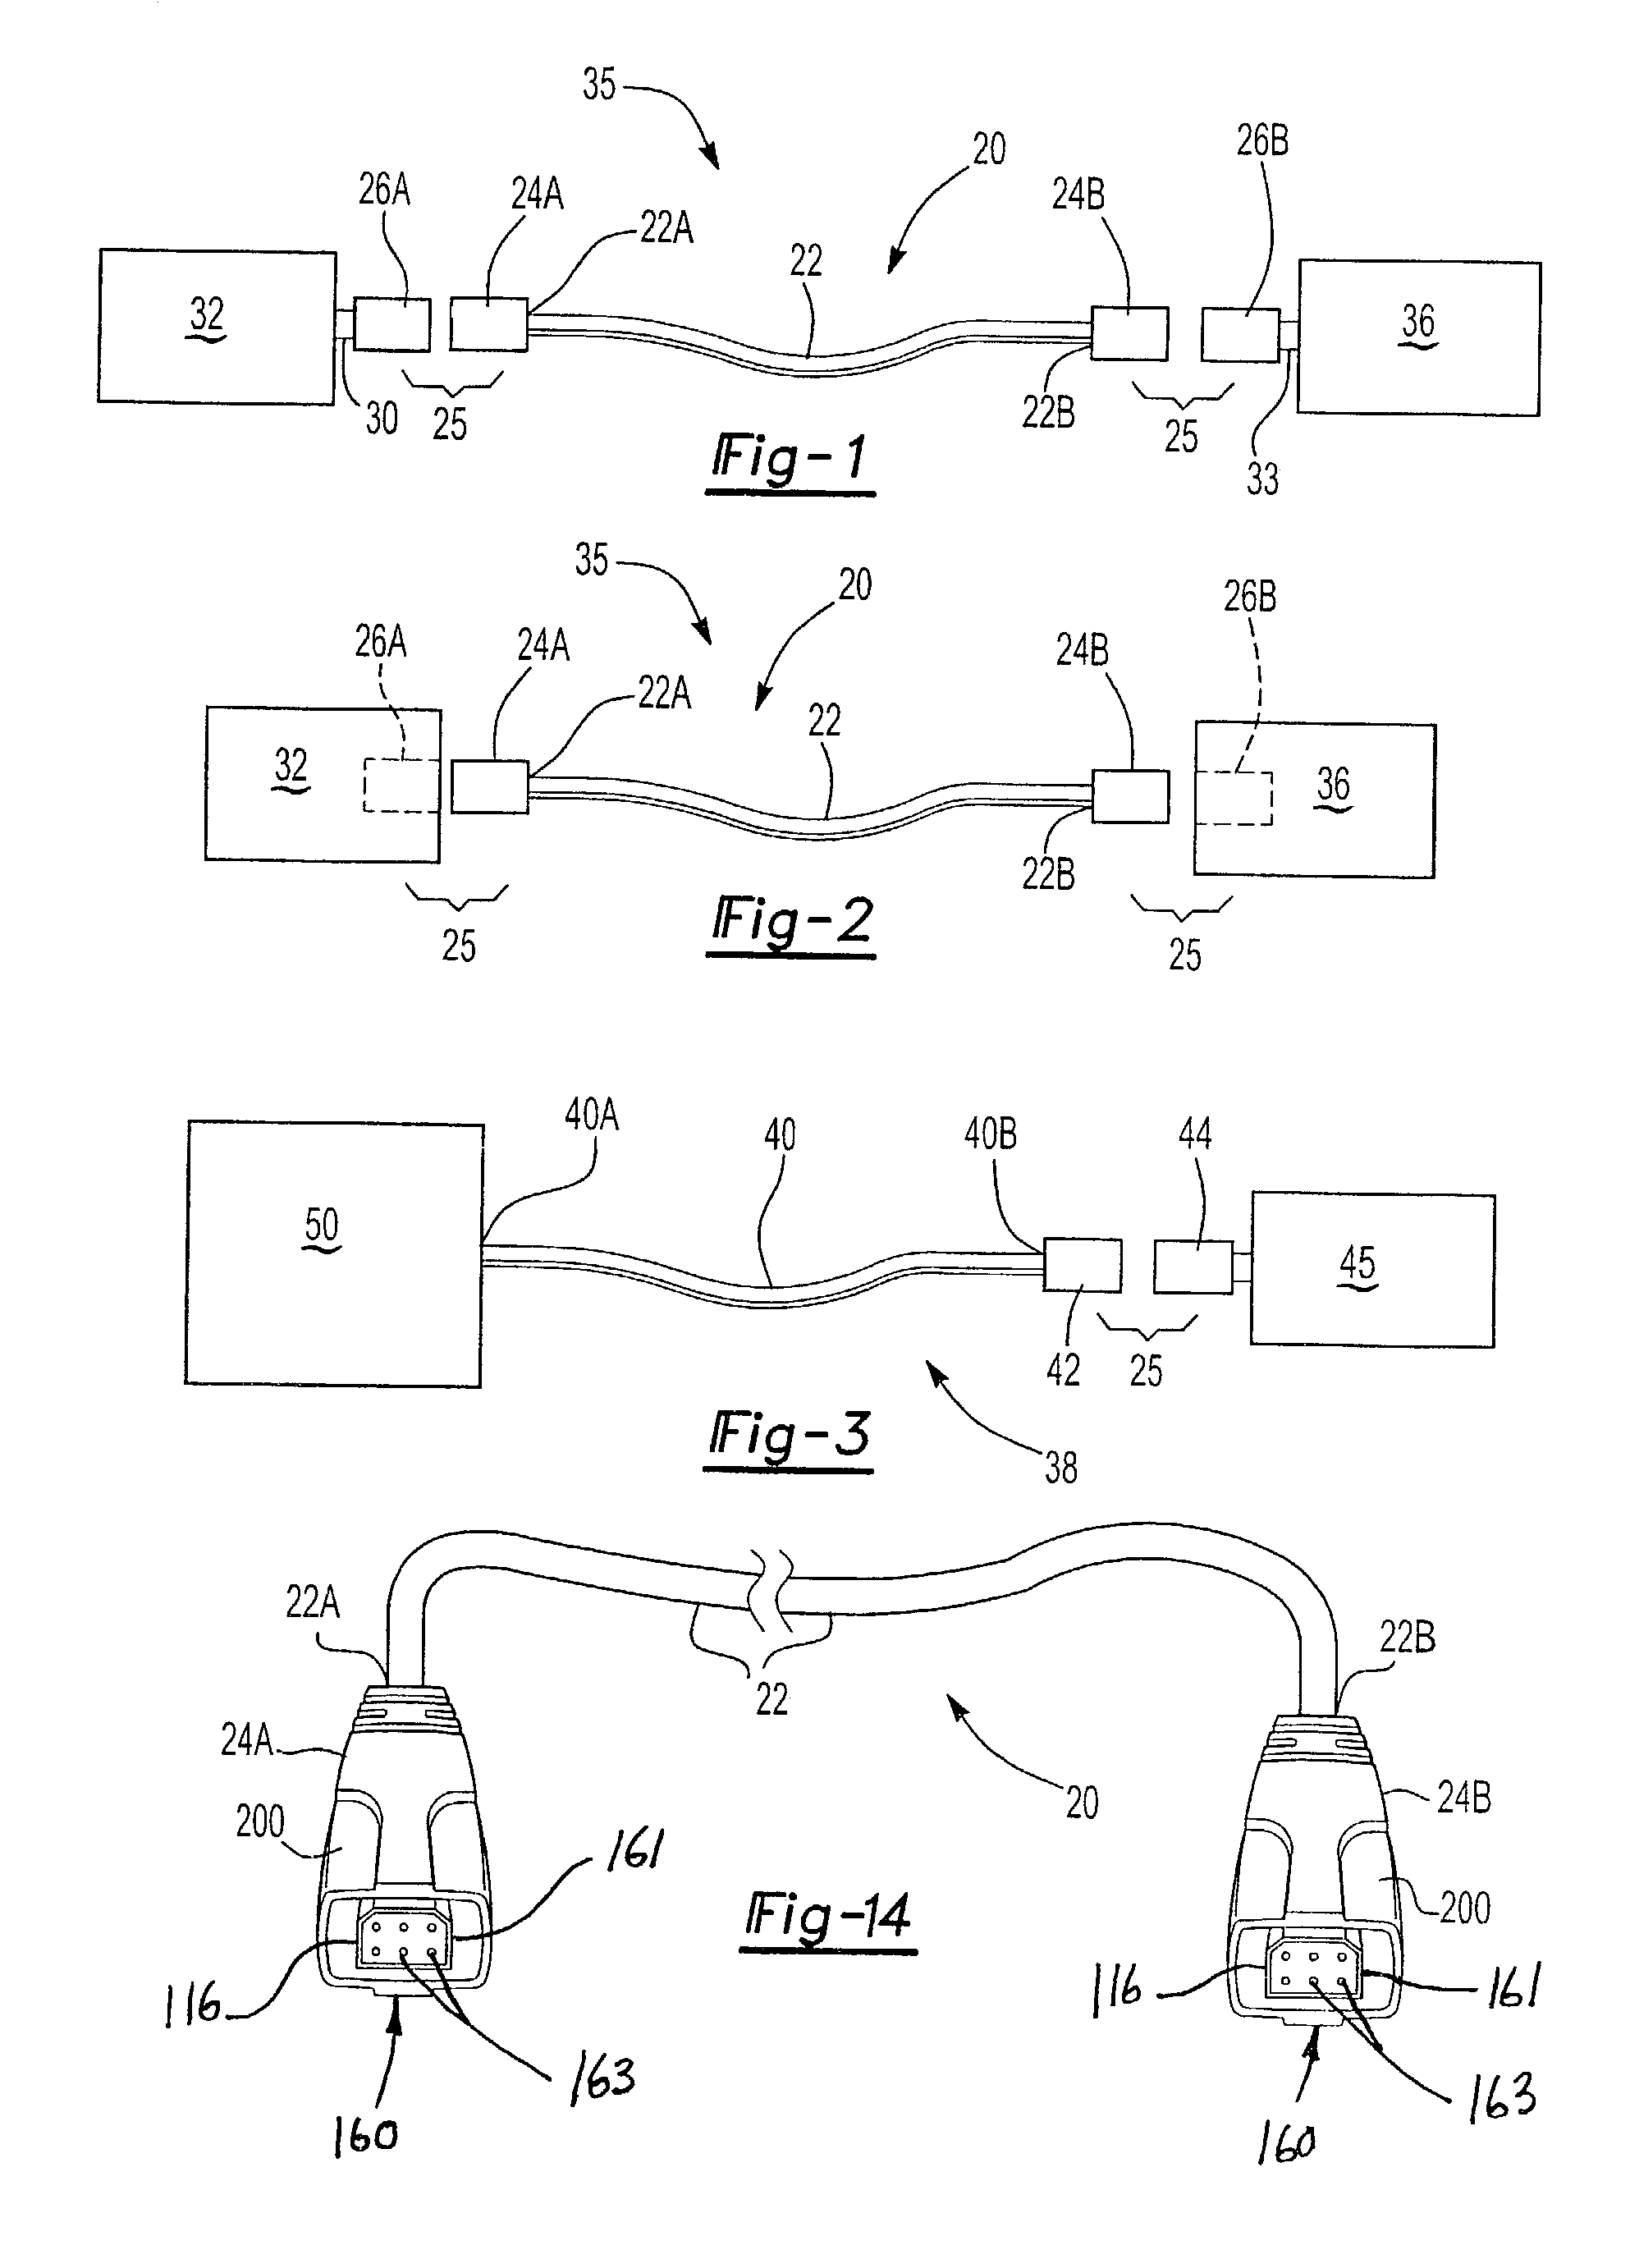 Universal computer cable with quick connectors and interchangeable ends, and system and method utilizing the same